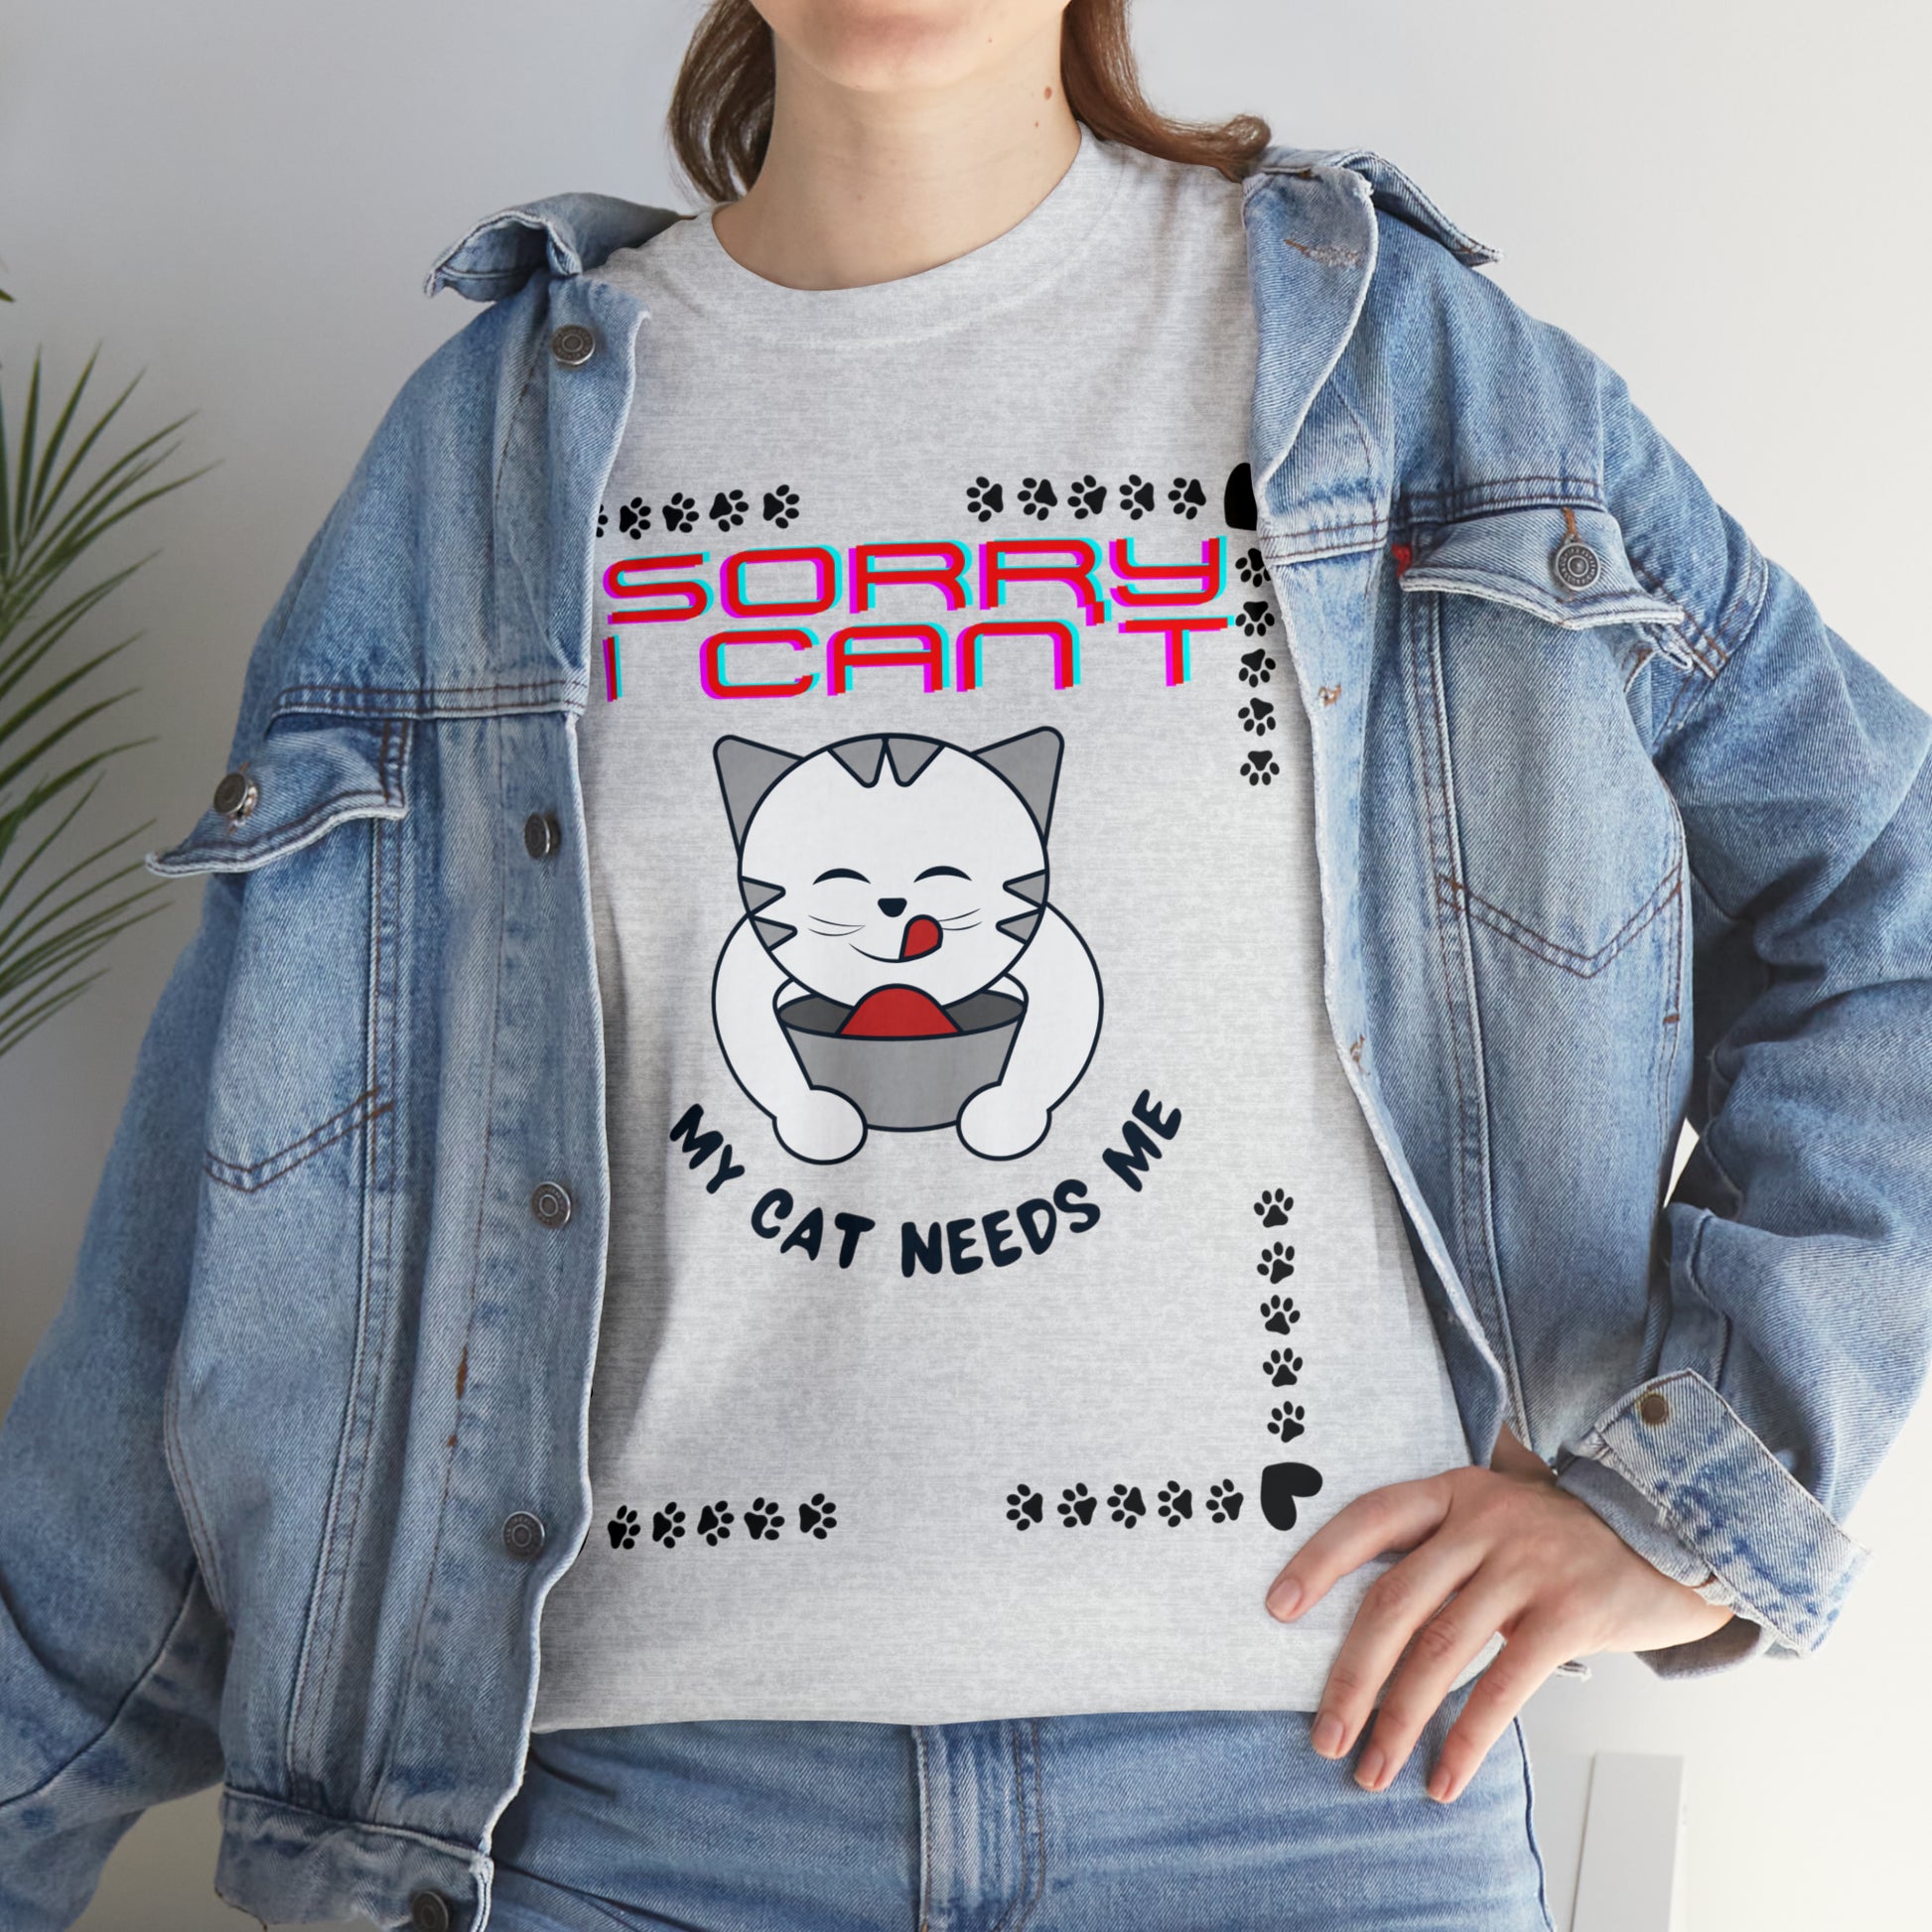 Sorry I Can't My Cat Needs Me T-Shirt | Cat Mom Shirt | Cat Lover Gift | Cat Mom Gift | Animal Lover Gift for Women T-Shirt Ash S 